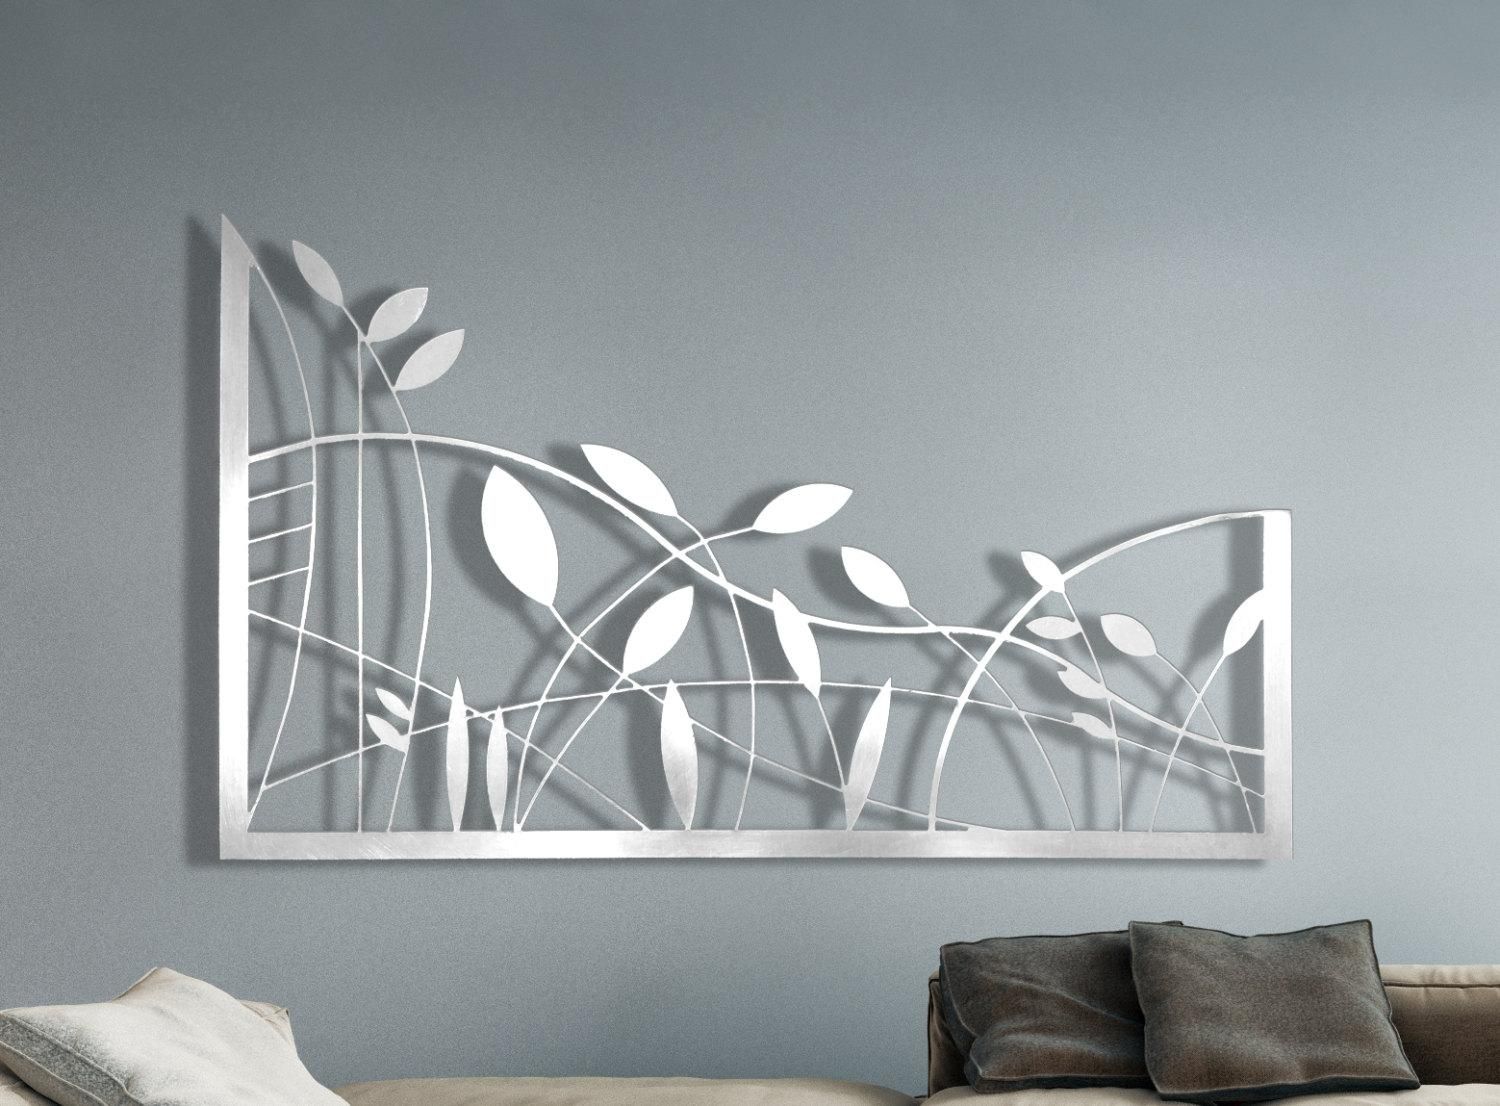 Laser Cut Metal Decorative Wall Art Panel Sculpture For Home With Metal Wall Art Outdoor Use (Photo 19 of 20)